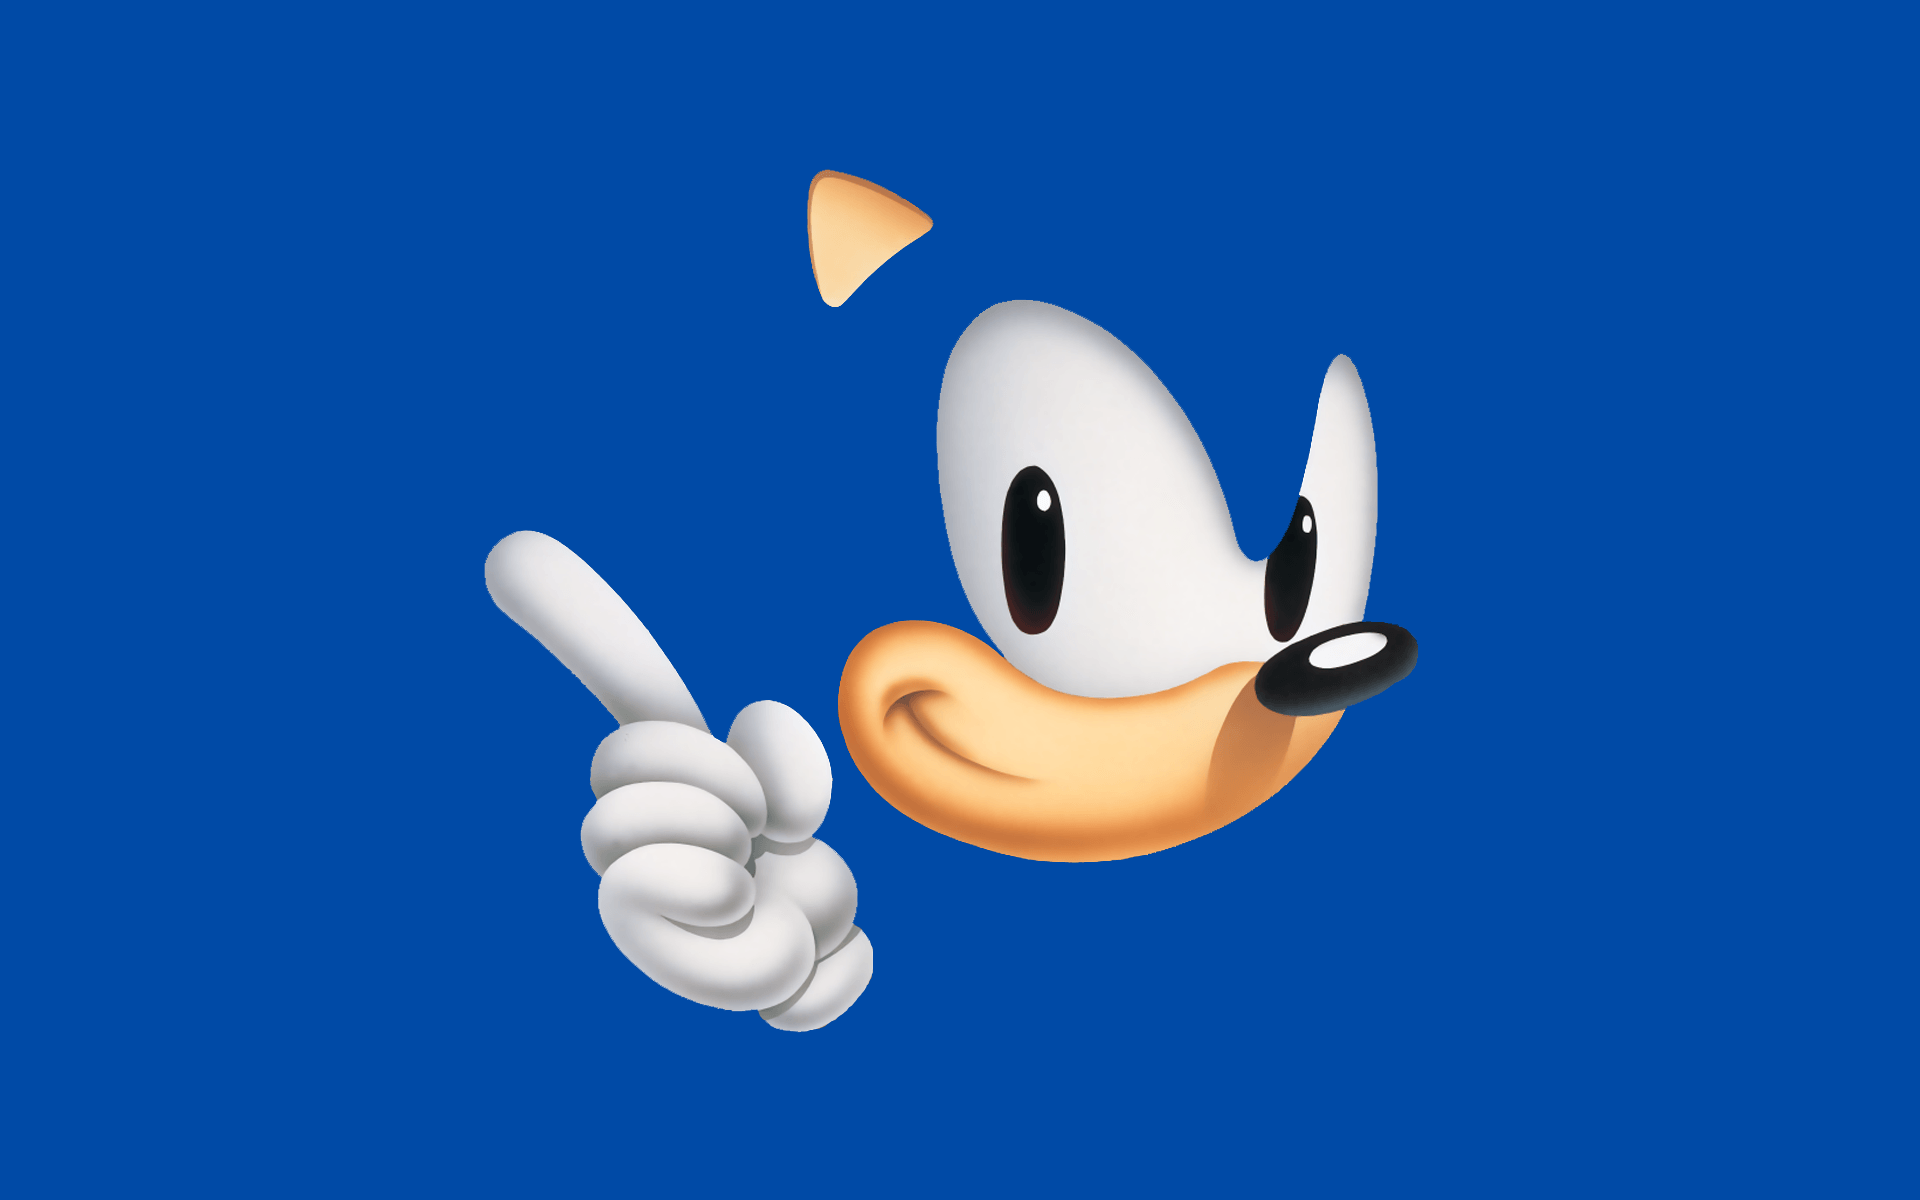 Sonic Wallpaper, High Quality Sonic Background and Wallpaper, W.Web